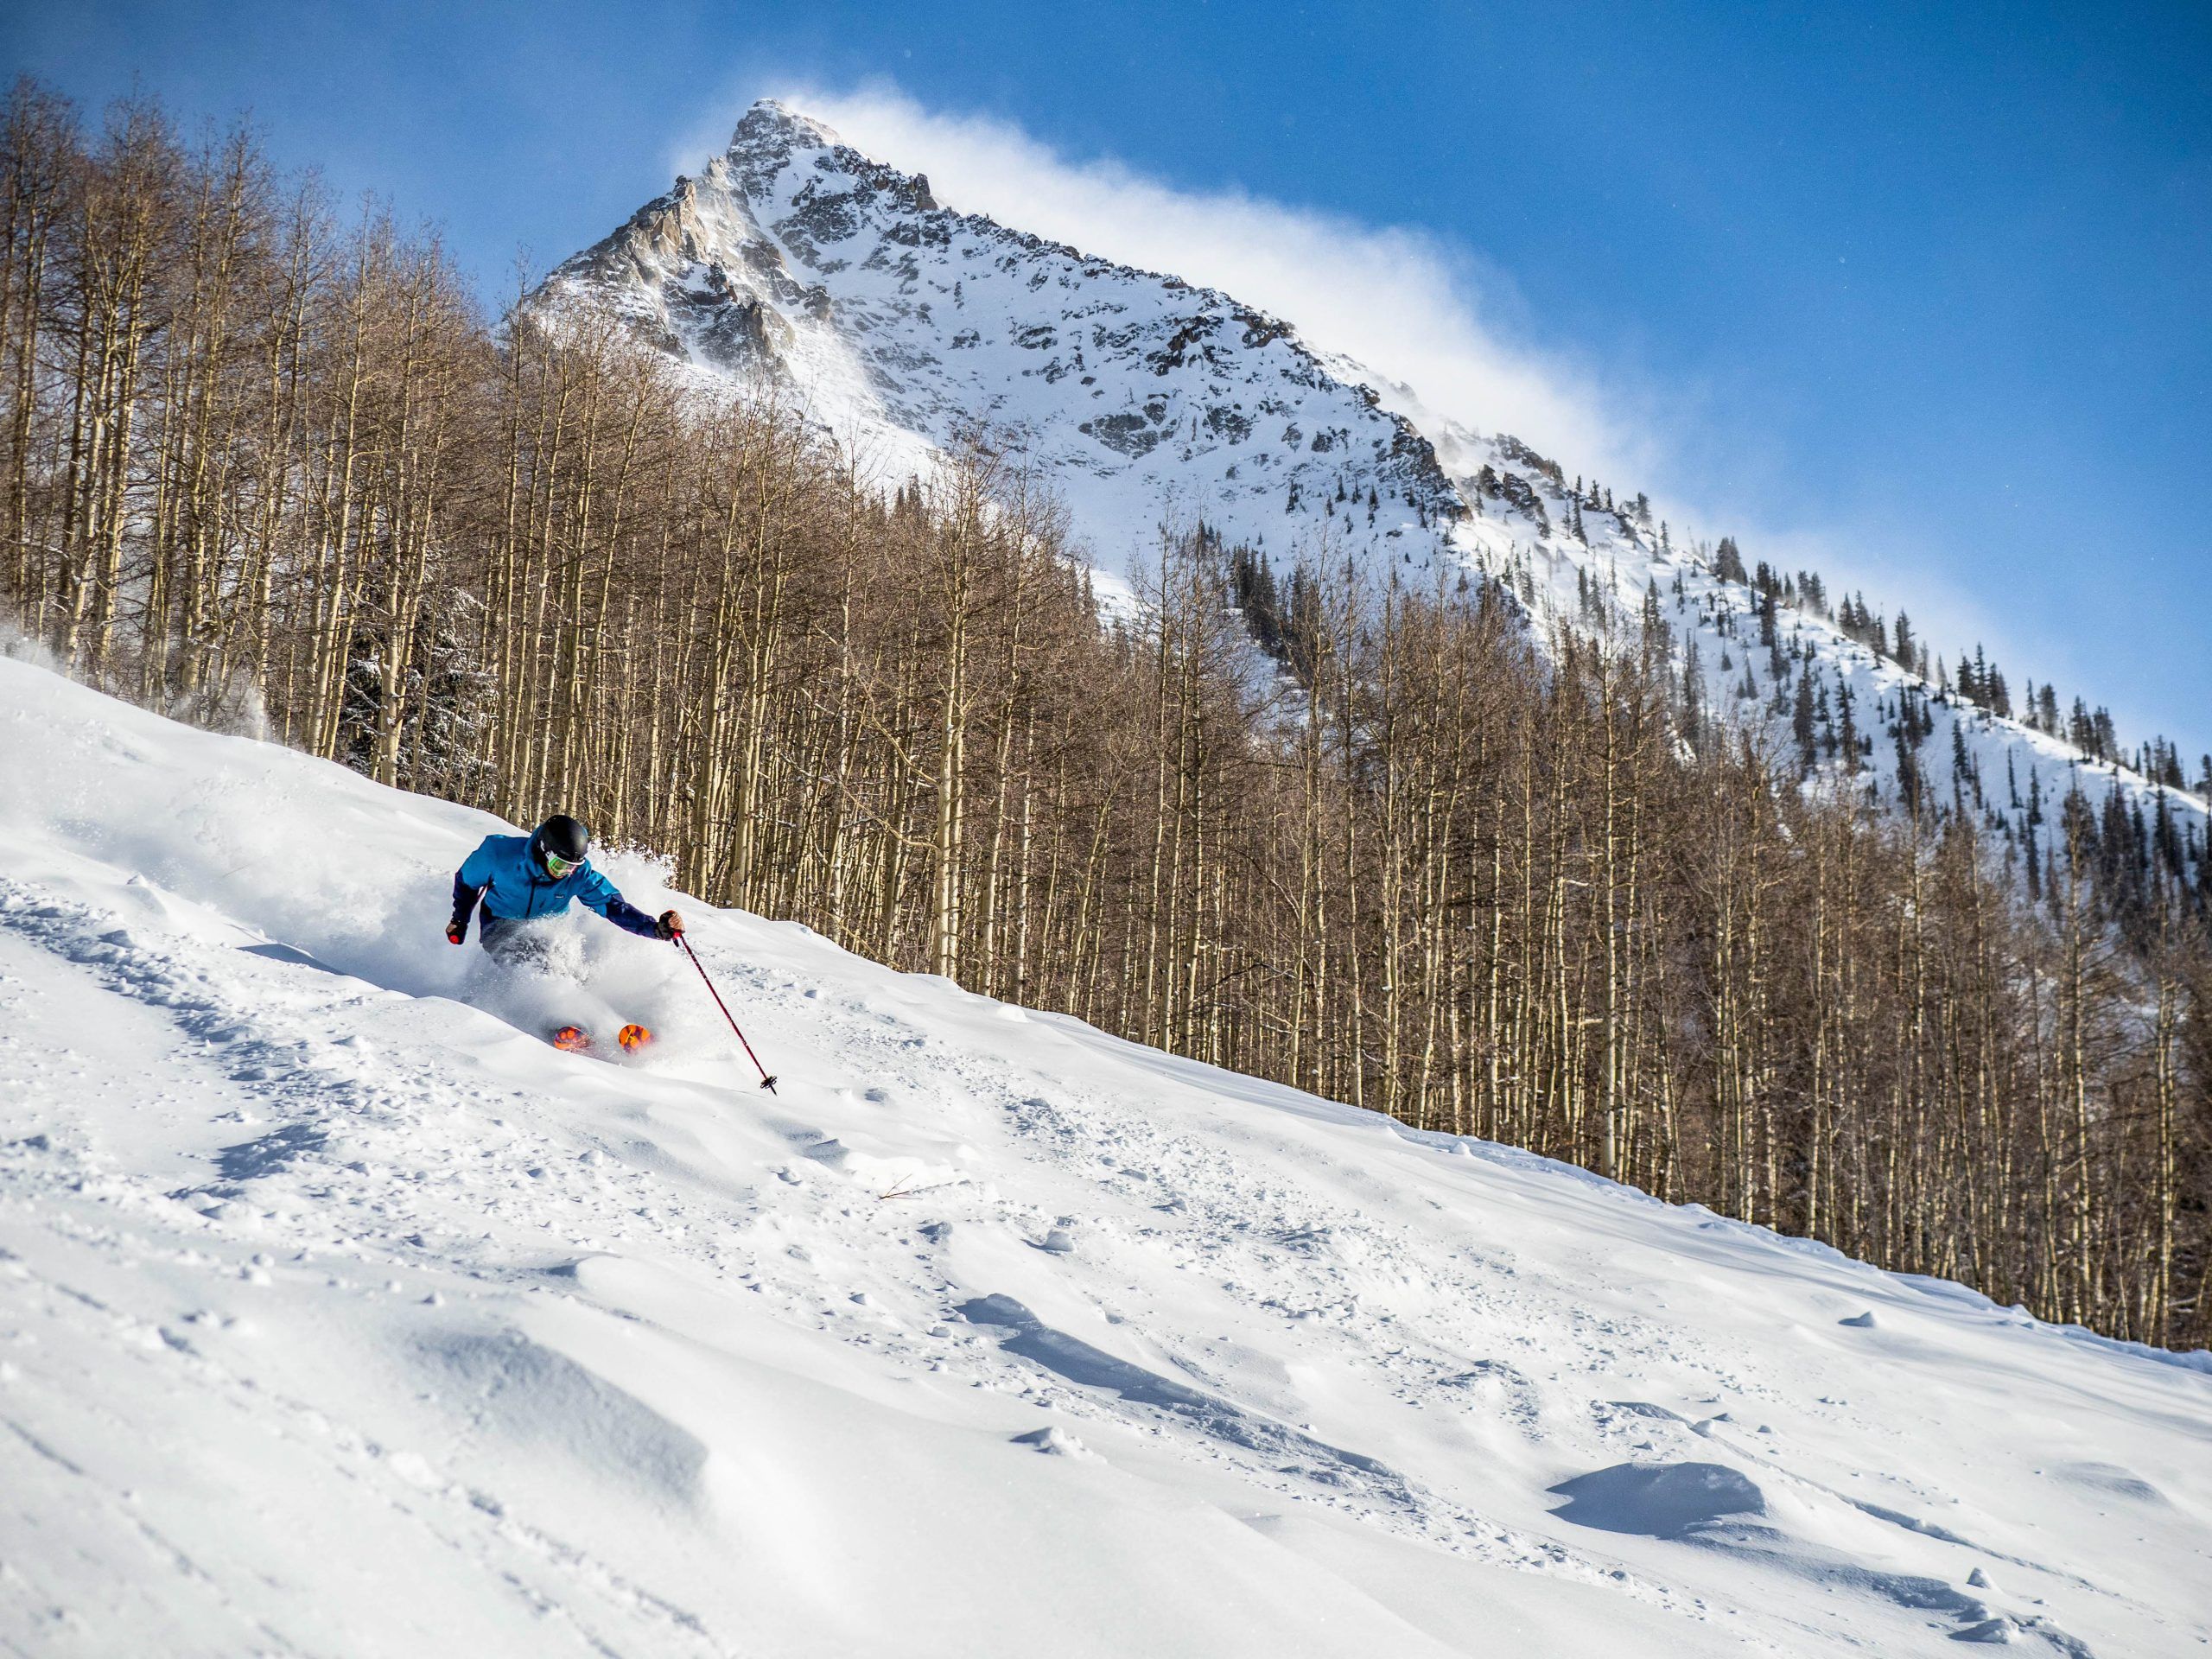 A skier at Crested Butte Mountain Resort in Crested Butte, Colorado.